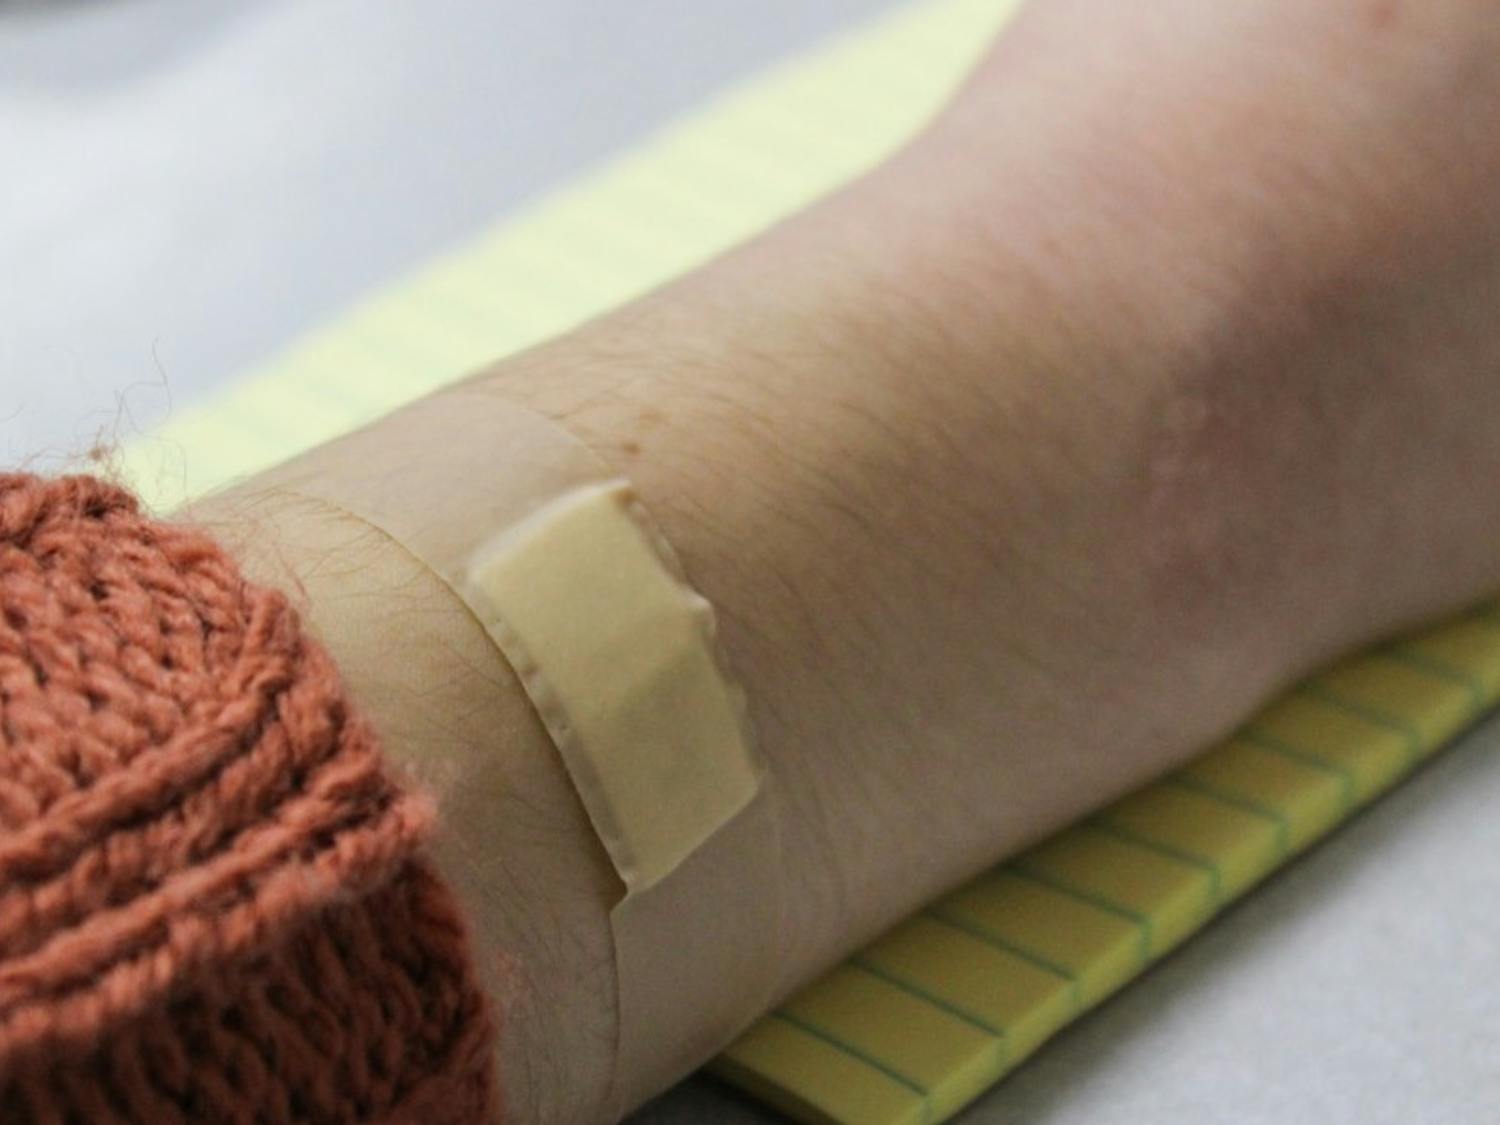 New bandage technology could be a faster, cost-efficient way to heal injuries. &nbsp;